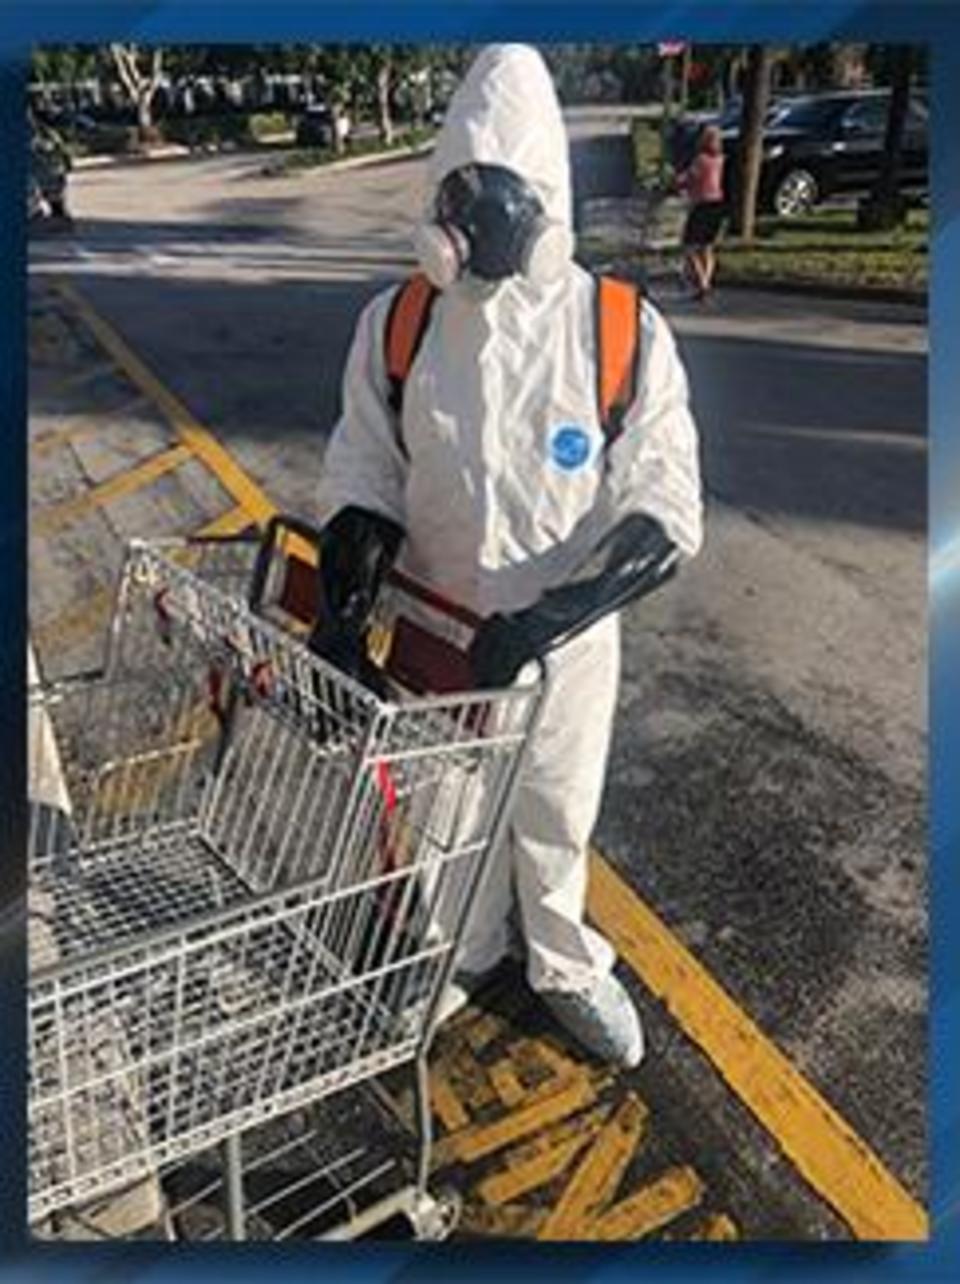 Man In Hazmat Suit Spotted At Local Costco Line To Get Into Store